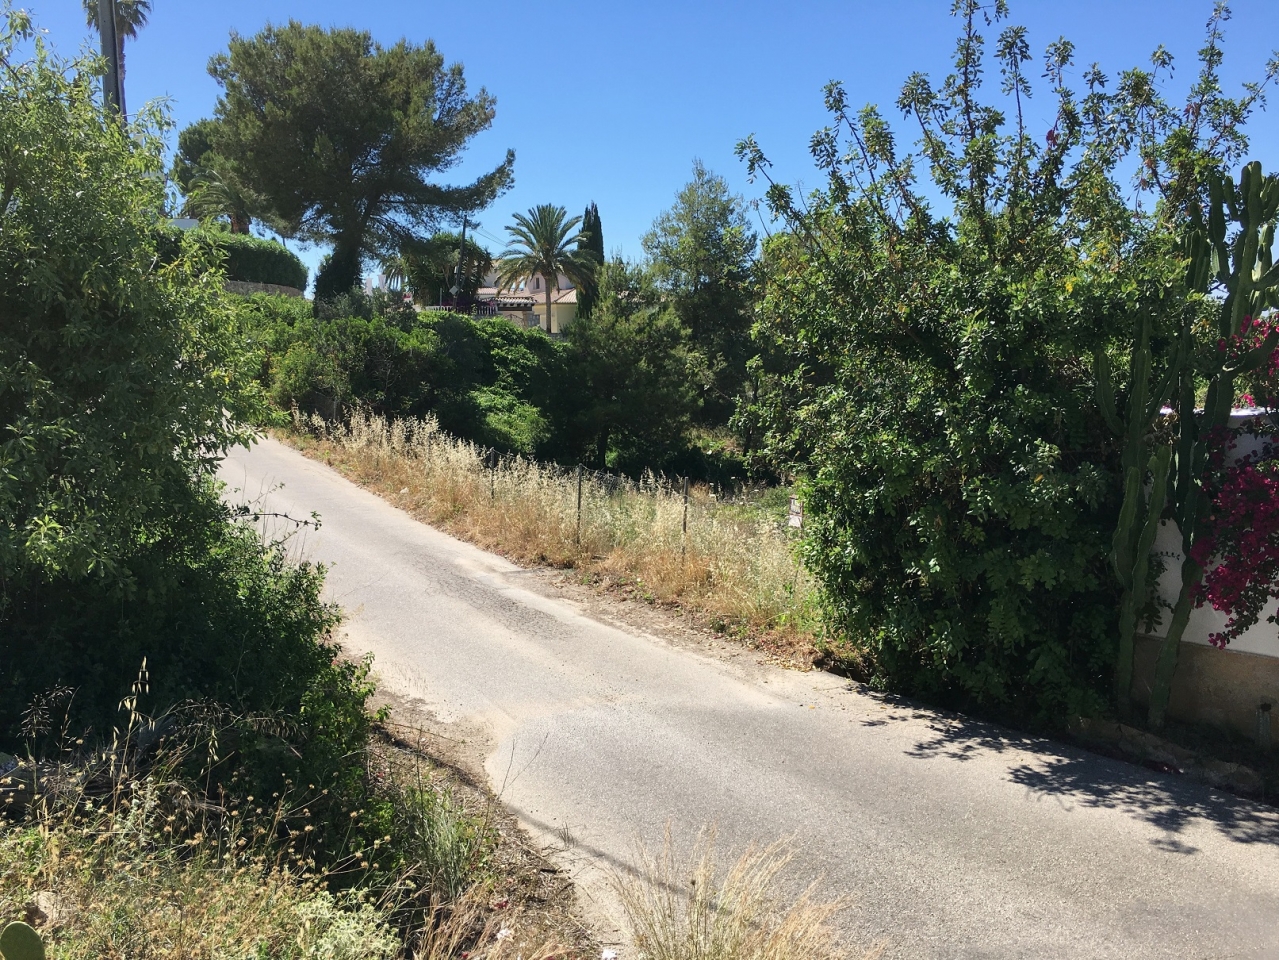 Plot in Denia, close to the beach and city centre. Quiet area. Mountain views.